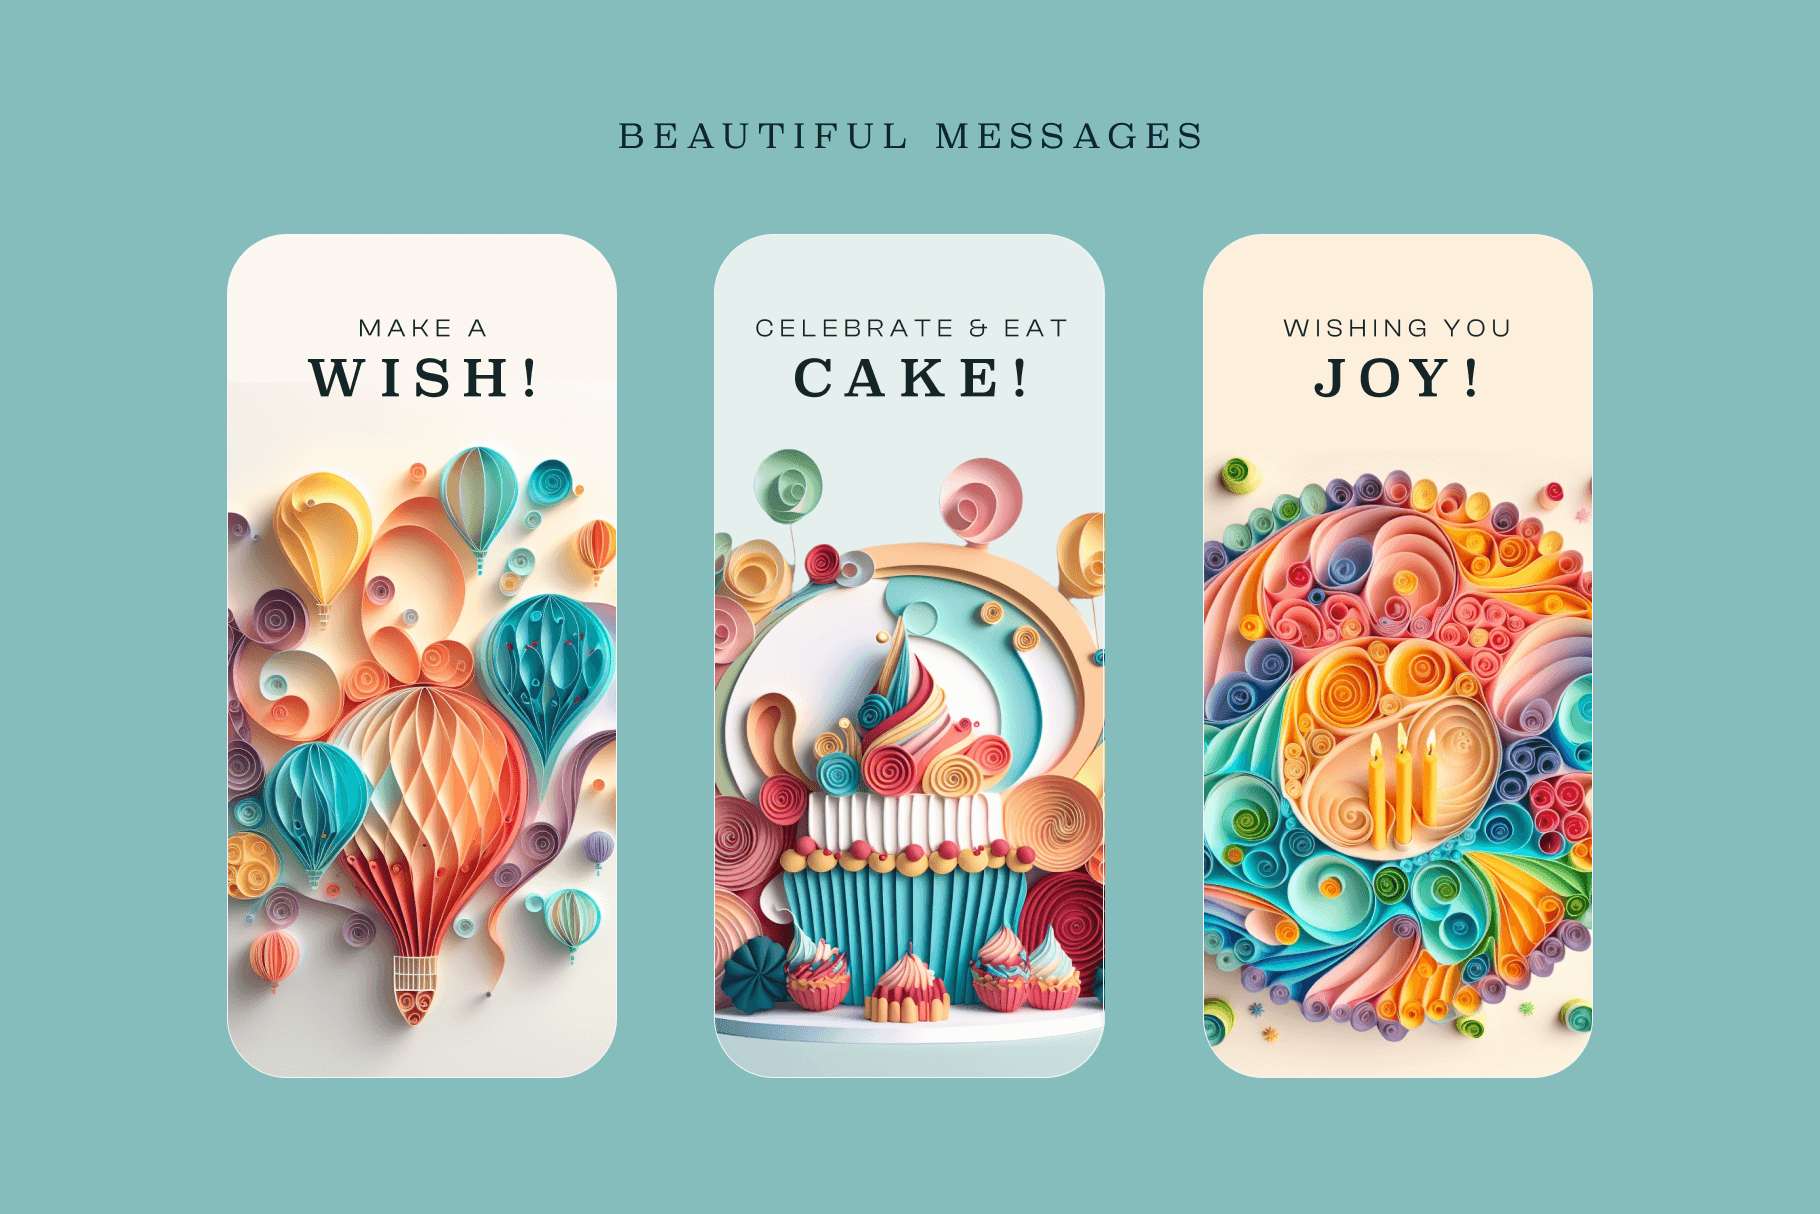 Paper art of a hot air balloon, a cupcake, and birthday cake